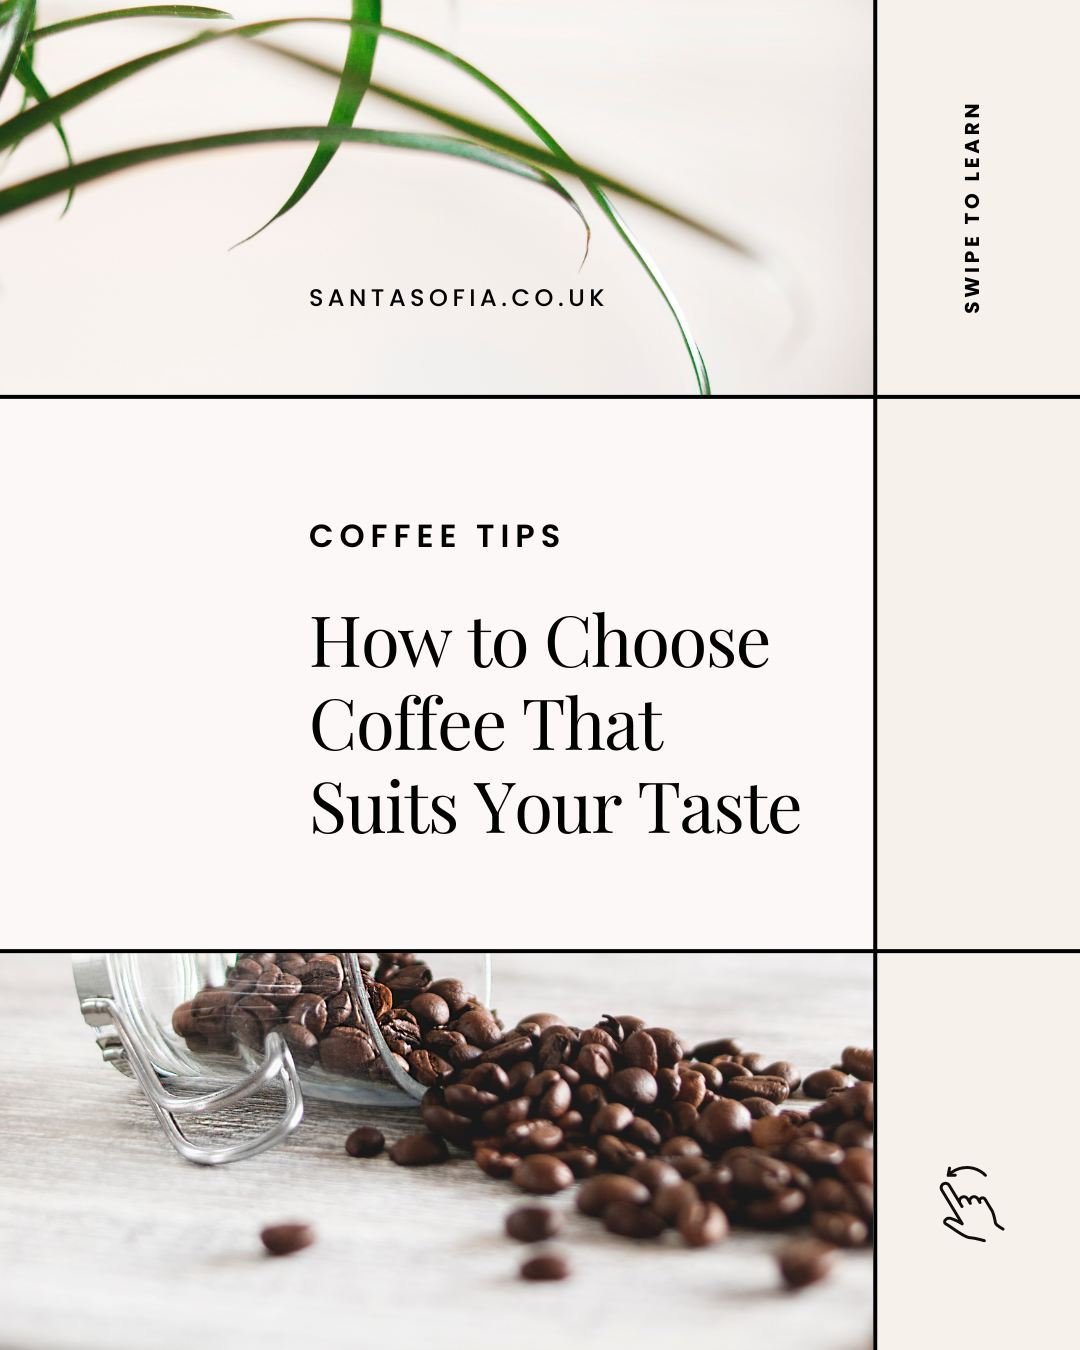 Are you choosing the right coffee for YOU? 👀

Choosing coffee beans can be a hard task. All those symbols and words on the packages&hellip; And you never manage to choose one that suits your taste.

Does this sound familiar?

What if you could decod